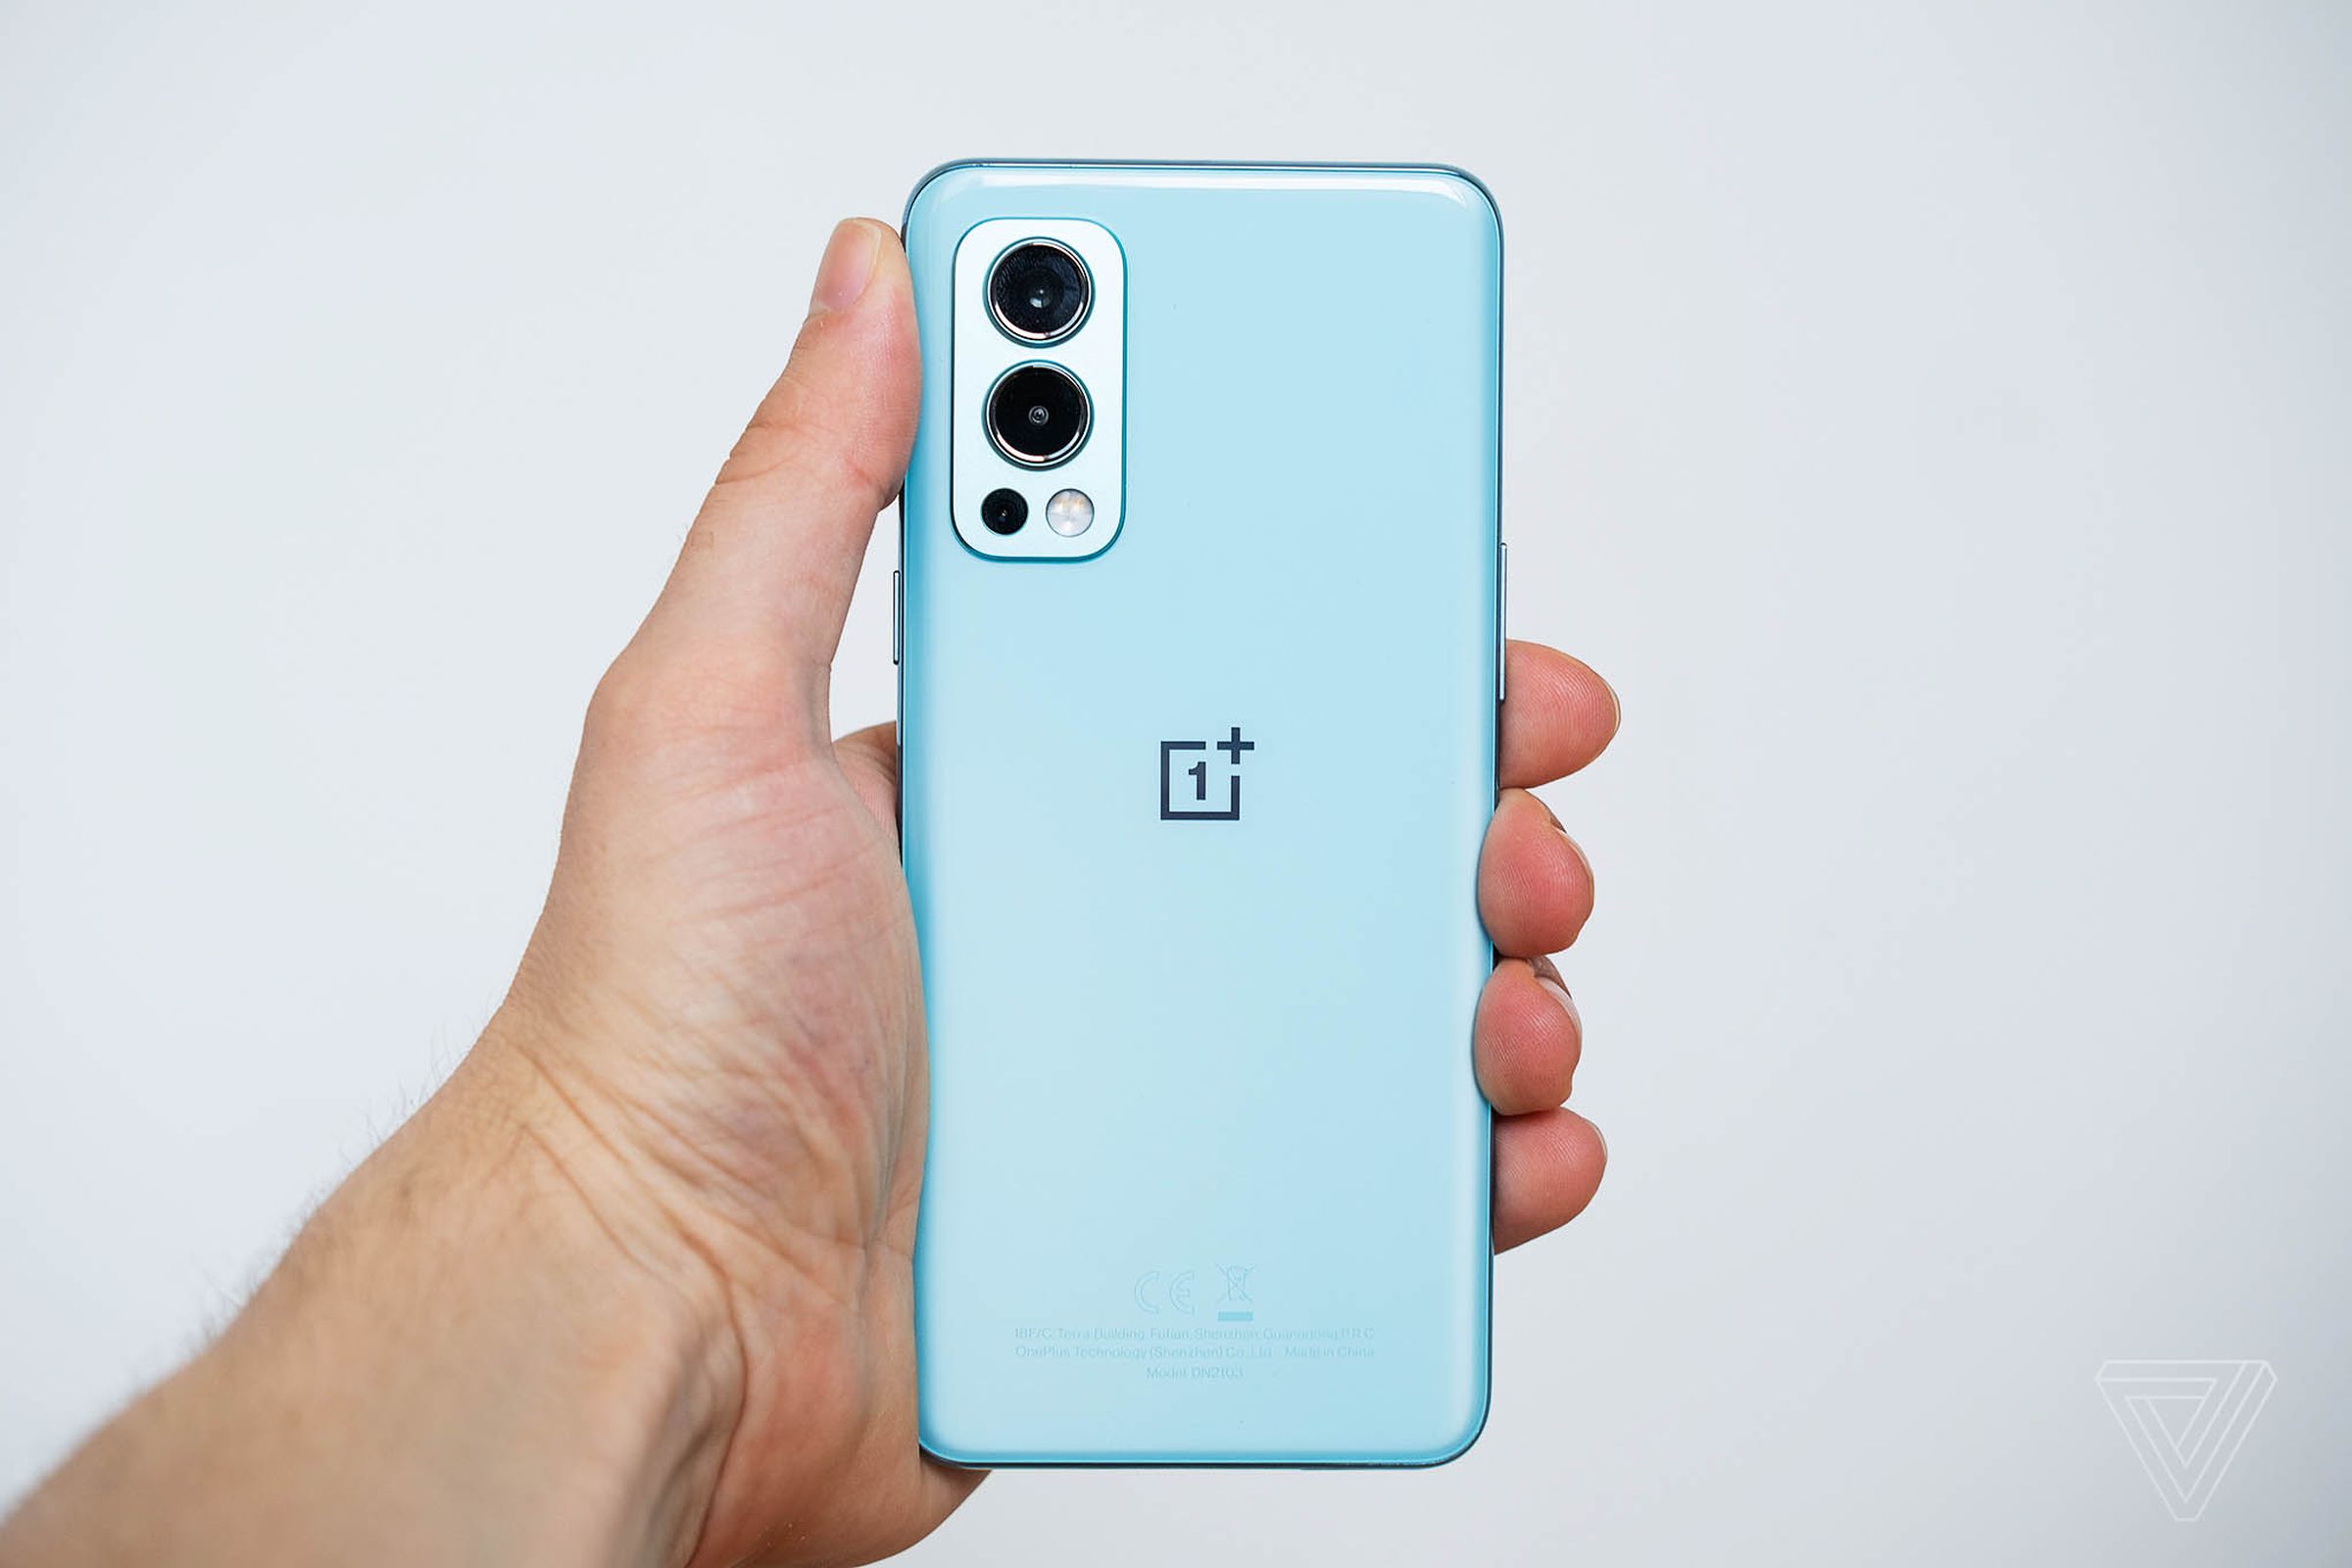 Squint, and you could believe the Nord 2 is a OnePlus 9.